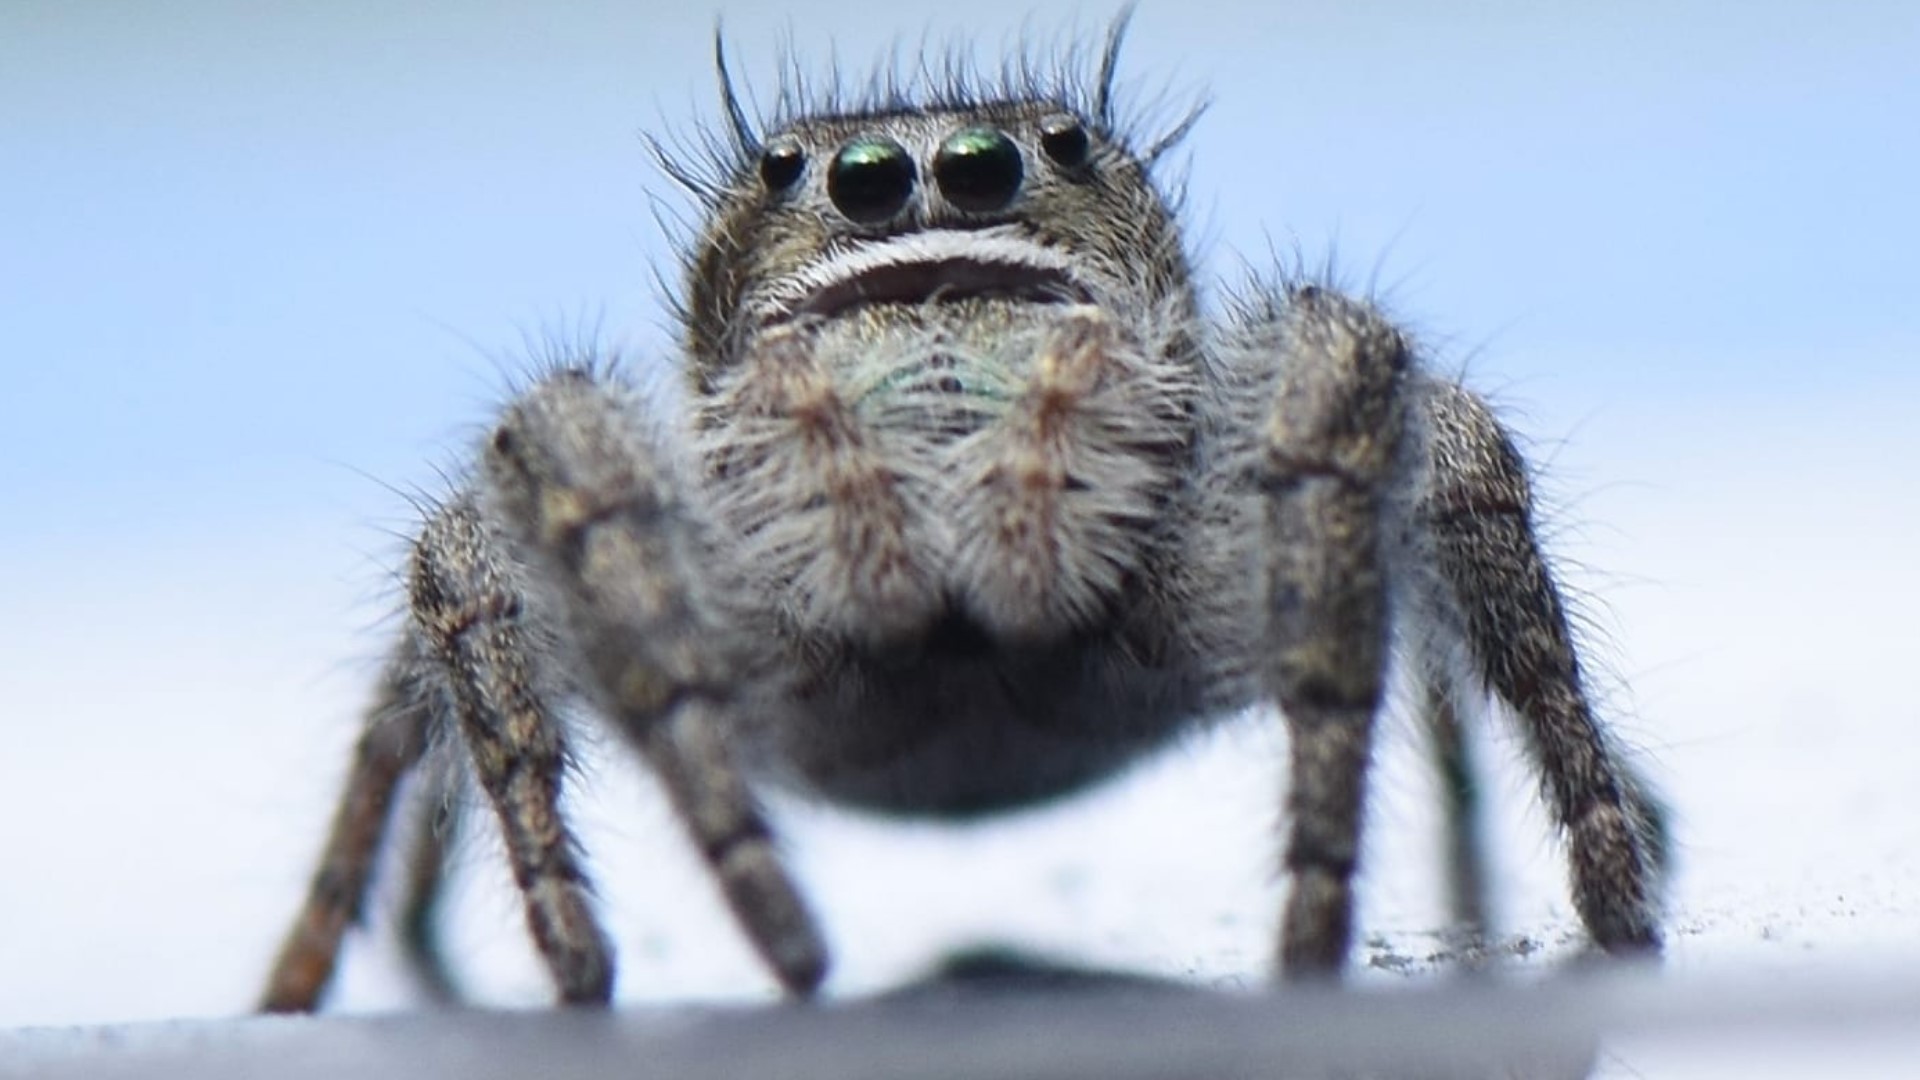 New research more than a decade in the making says there are far more types of spiders in Maine than was previously known. Experts say that's a good thing.